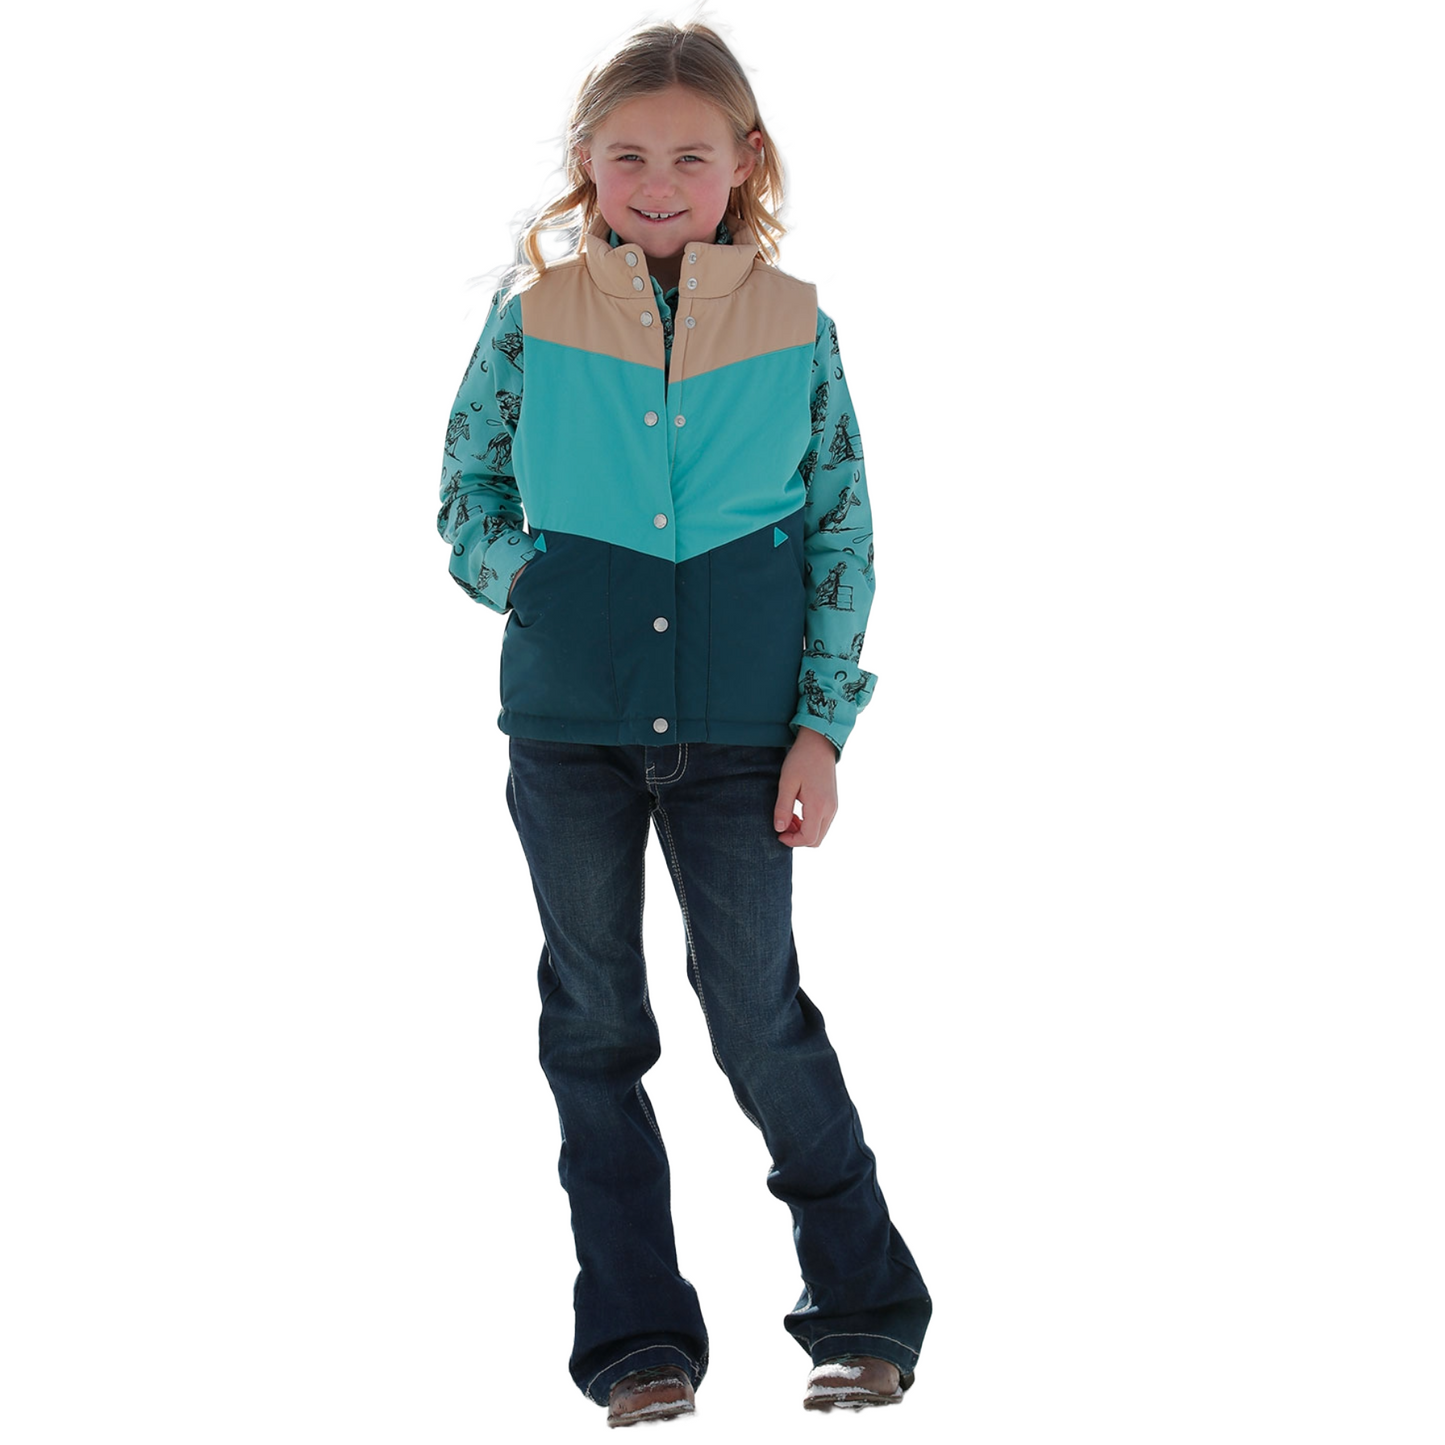 Cinch Youth Girl's Teal Colorblock Snap Puffer Vest CWV8830001